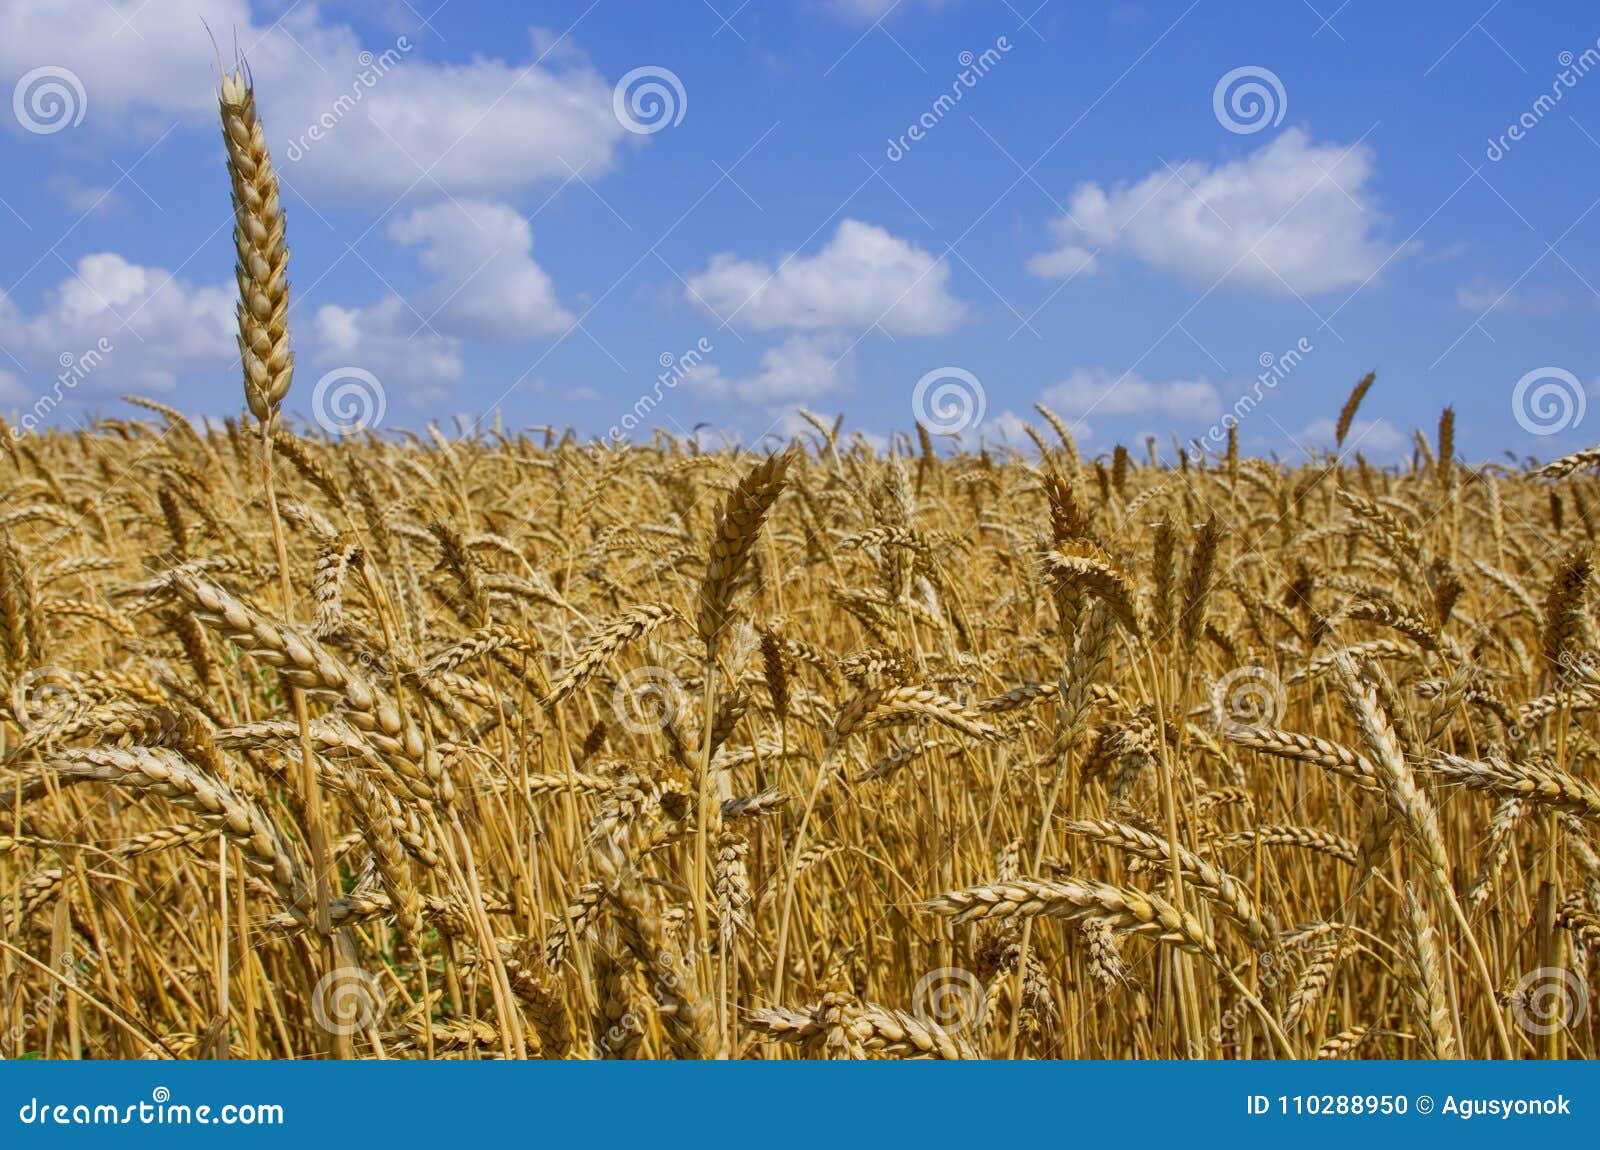 wheat field. cereals. harvest on an agricultural field. agrarian sector of production